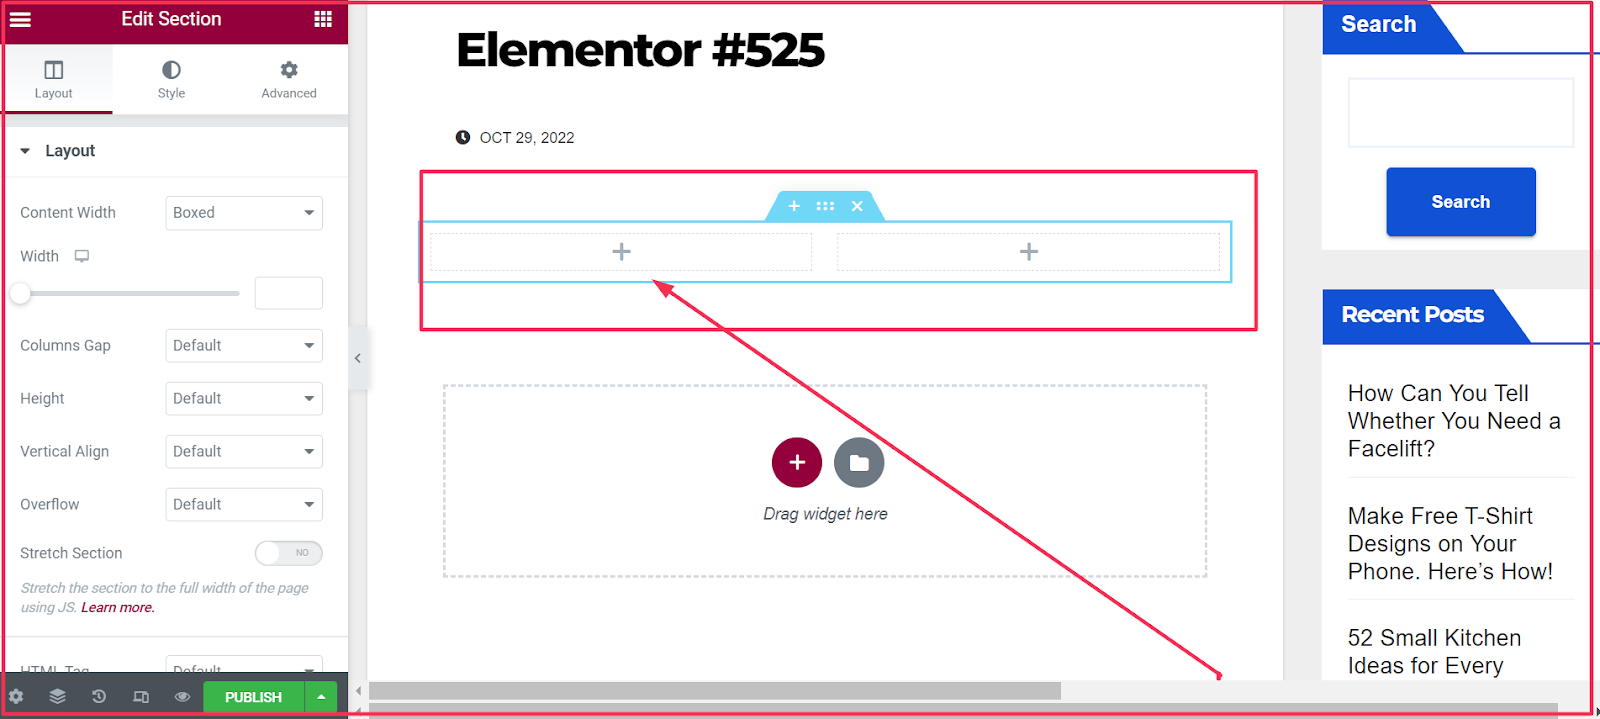 elementor website embed video add third screenshot - click plus icon and pase video url